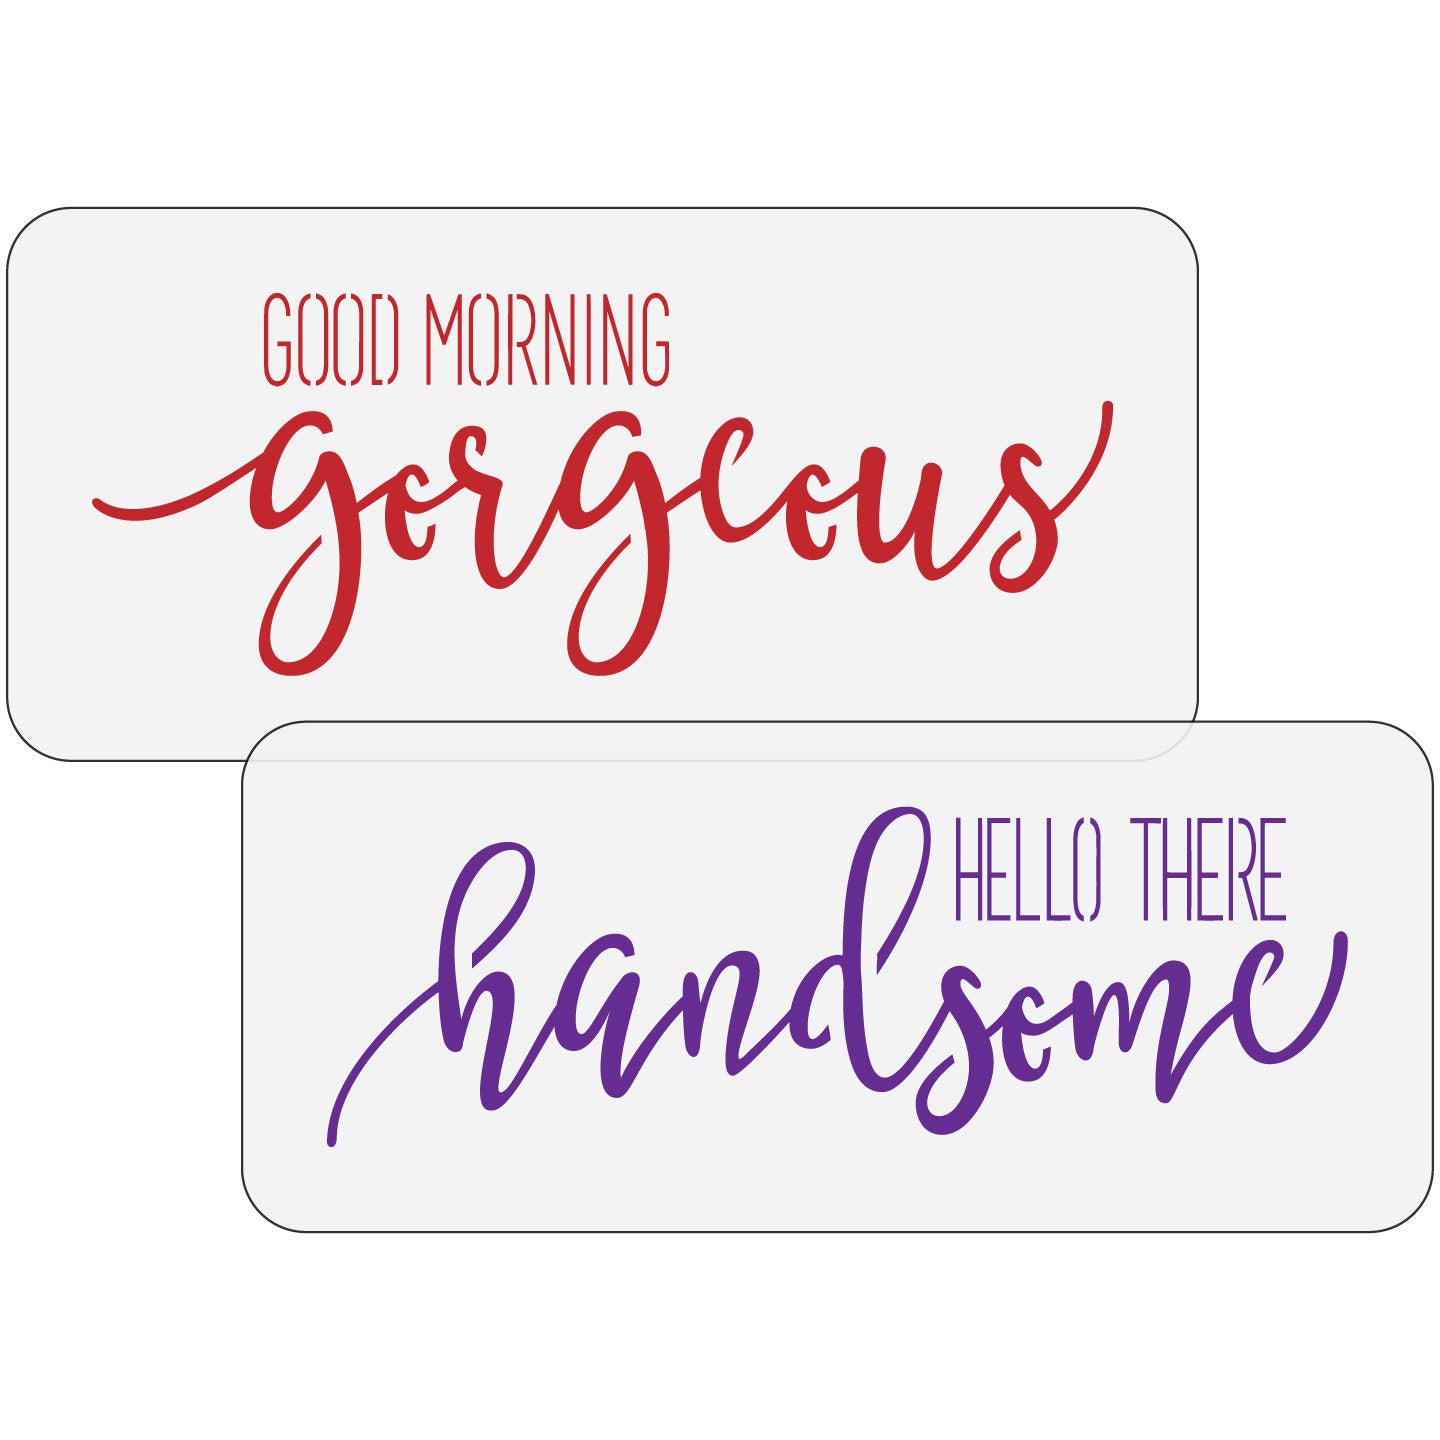 Good Morning Gorgeous, Hello There Handsome Stencil Set